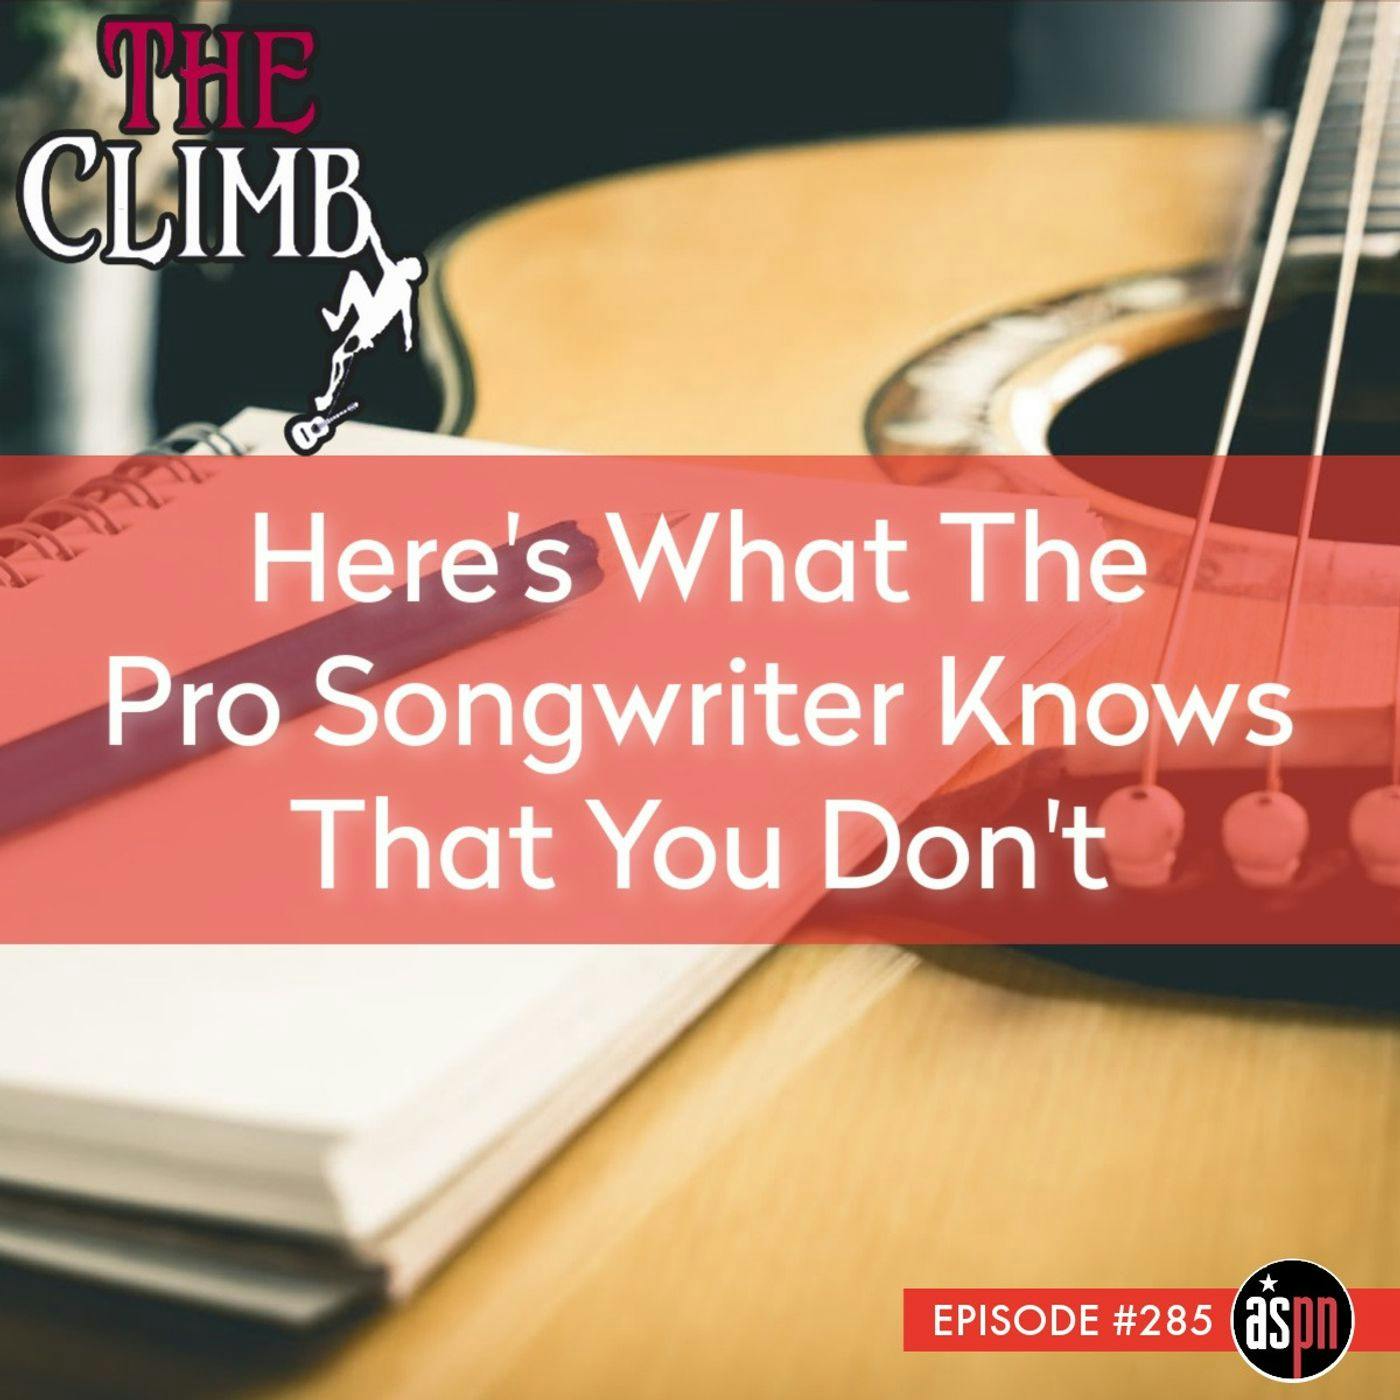 Episode #285: Here's What The Pro Songwriter Knows That You Don't